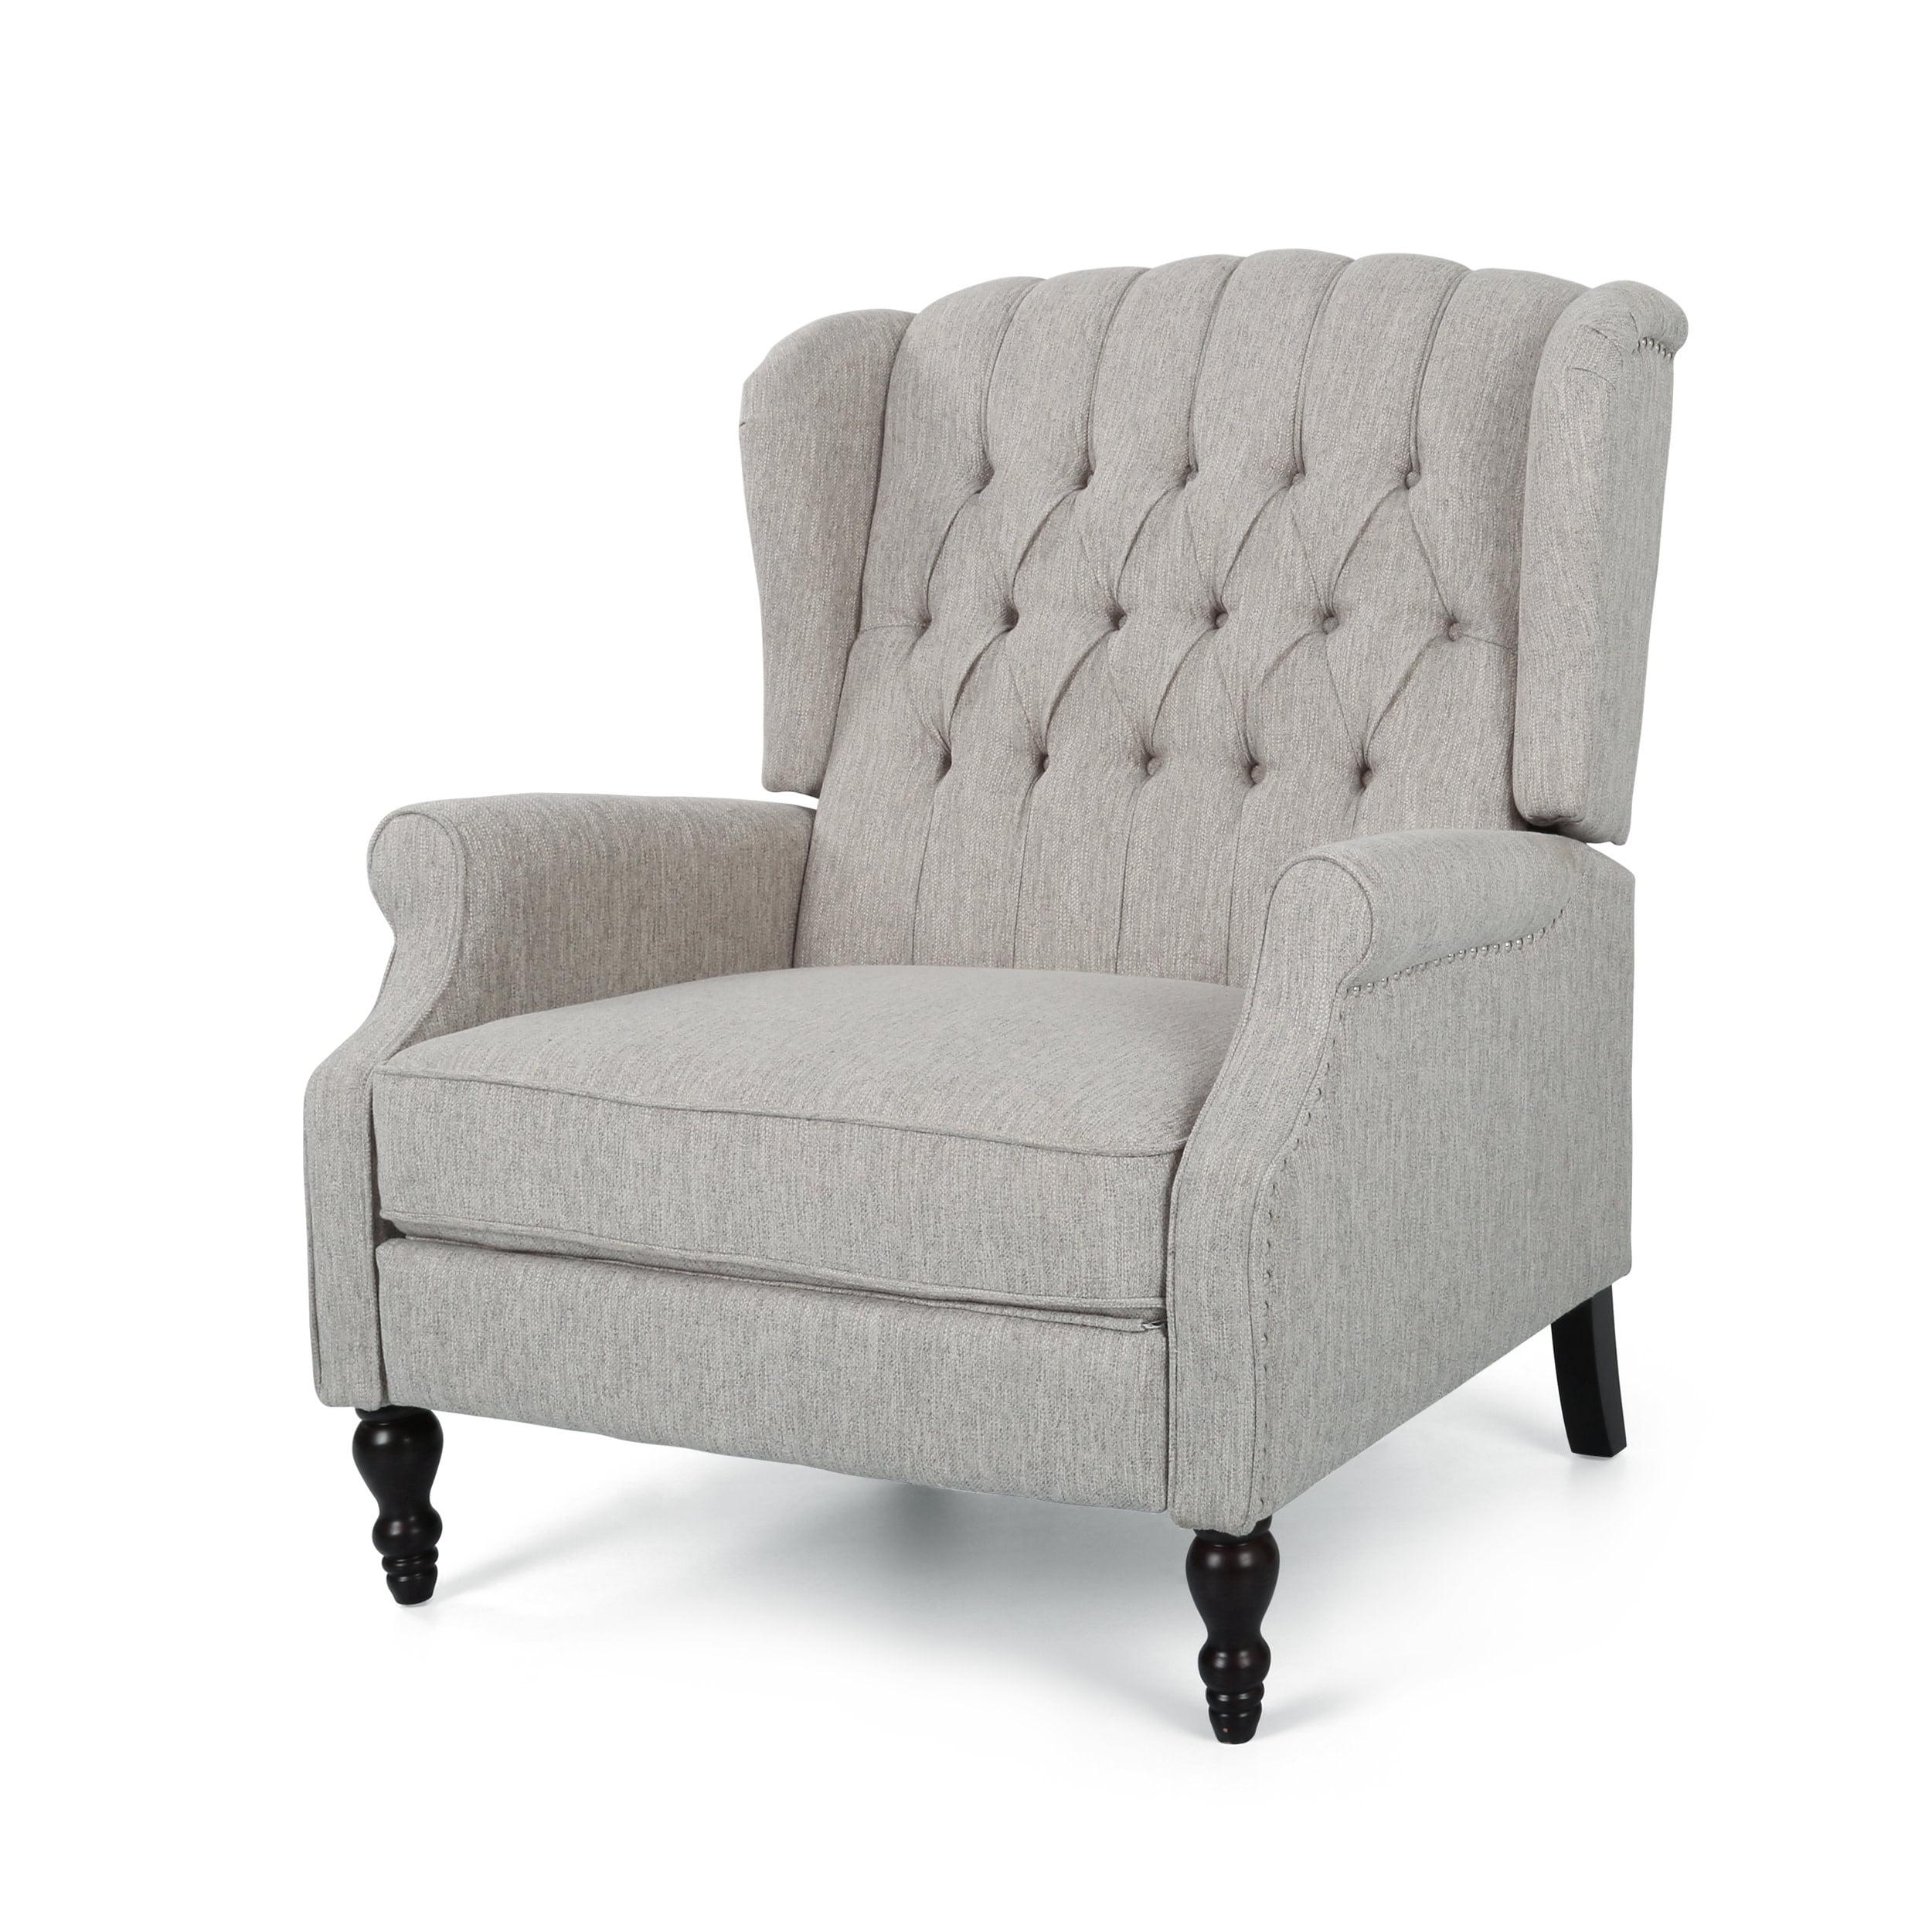 Salome Light Gray Oversized Tufted Wingback Recliner with Wooden Legs